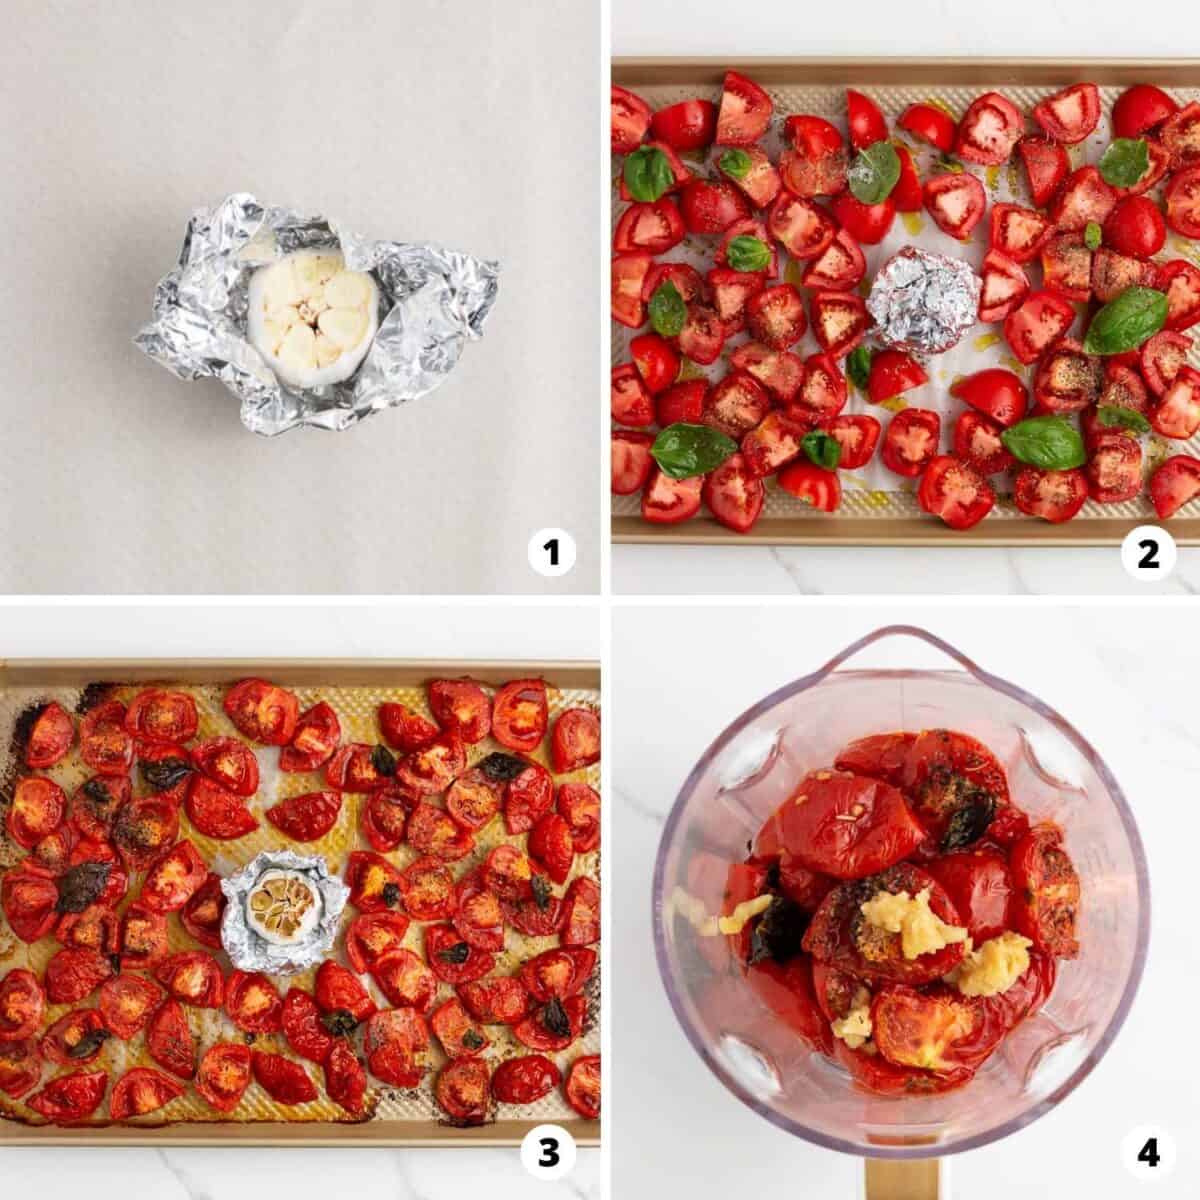 Step by step collage making tomato sauce.